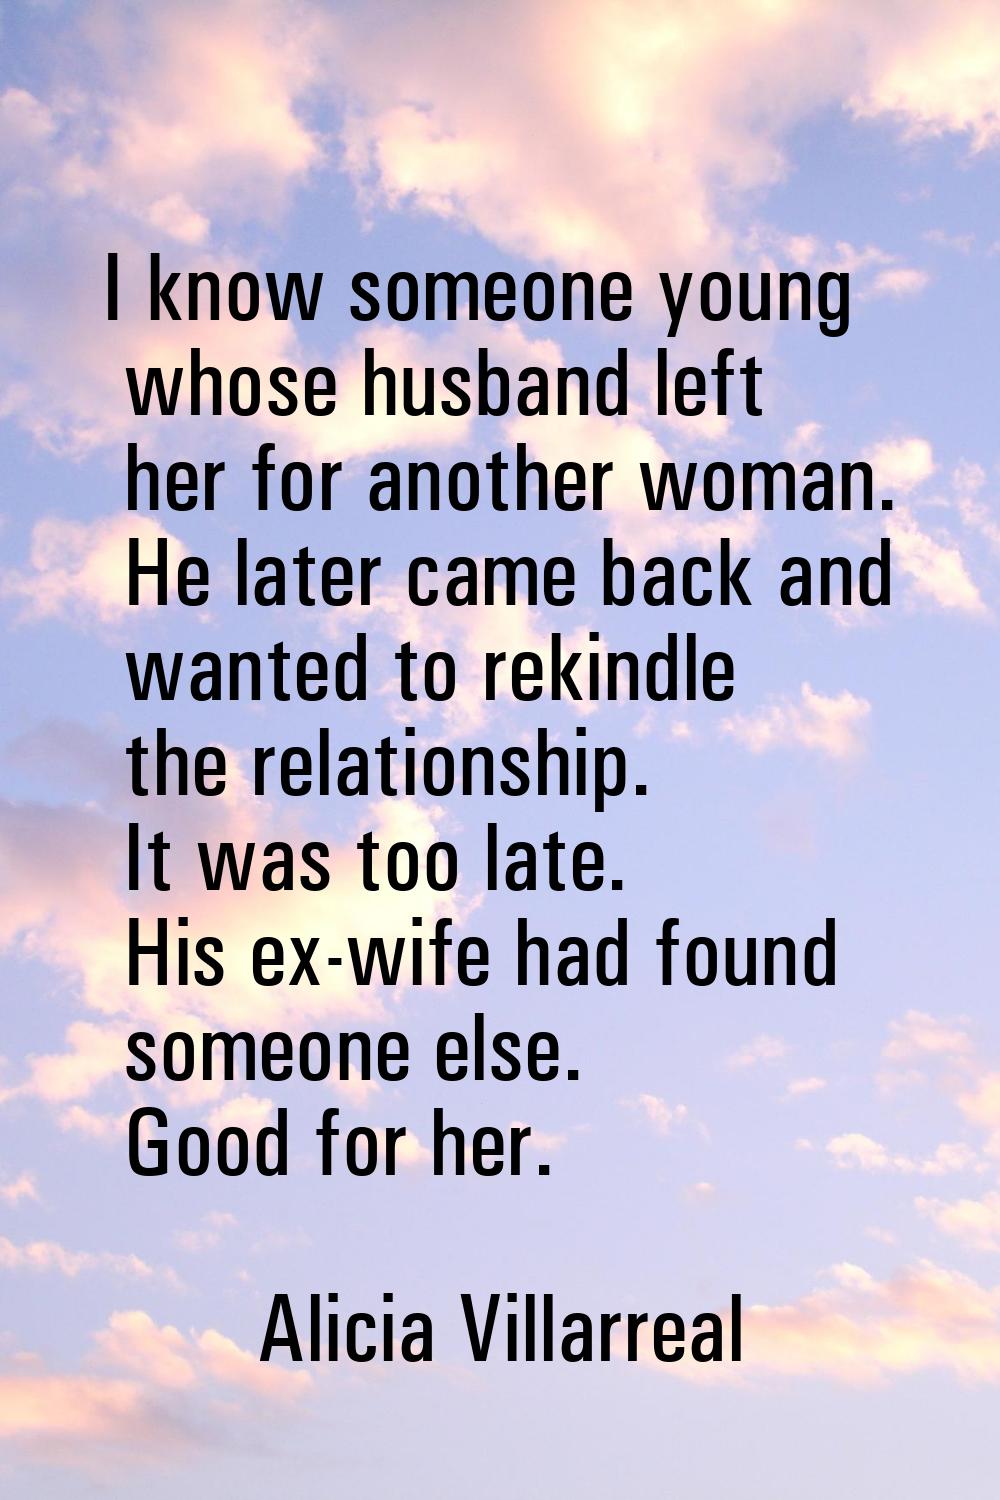 I know someone young whose husband left her for another woman. He later came back and wanted to rek